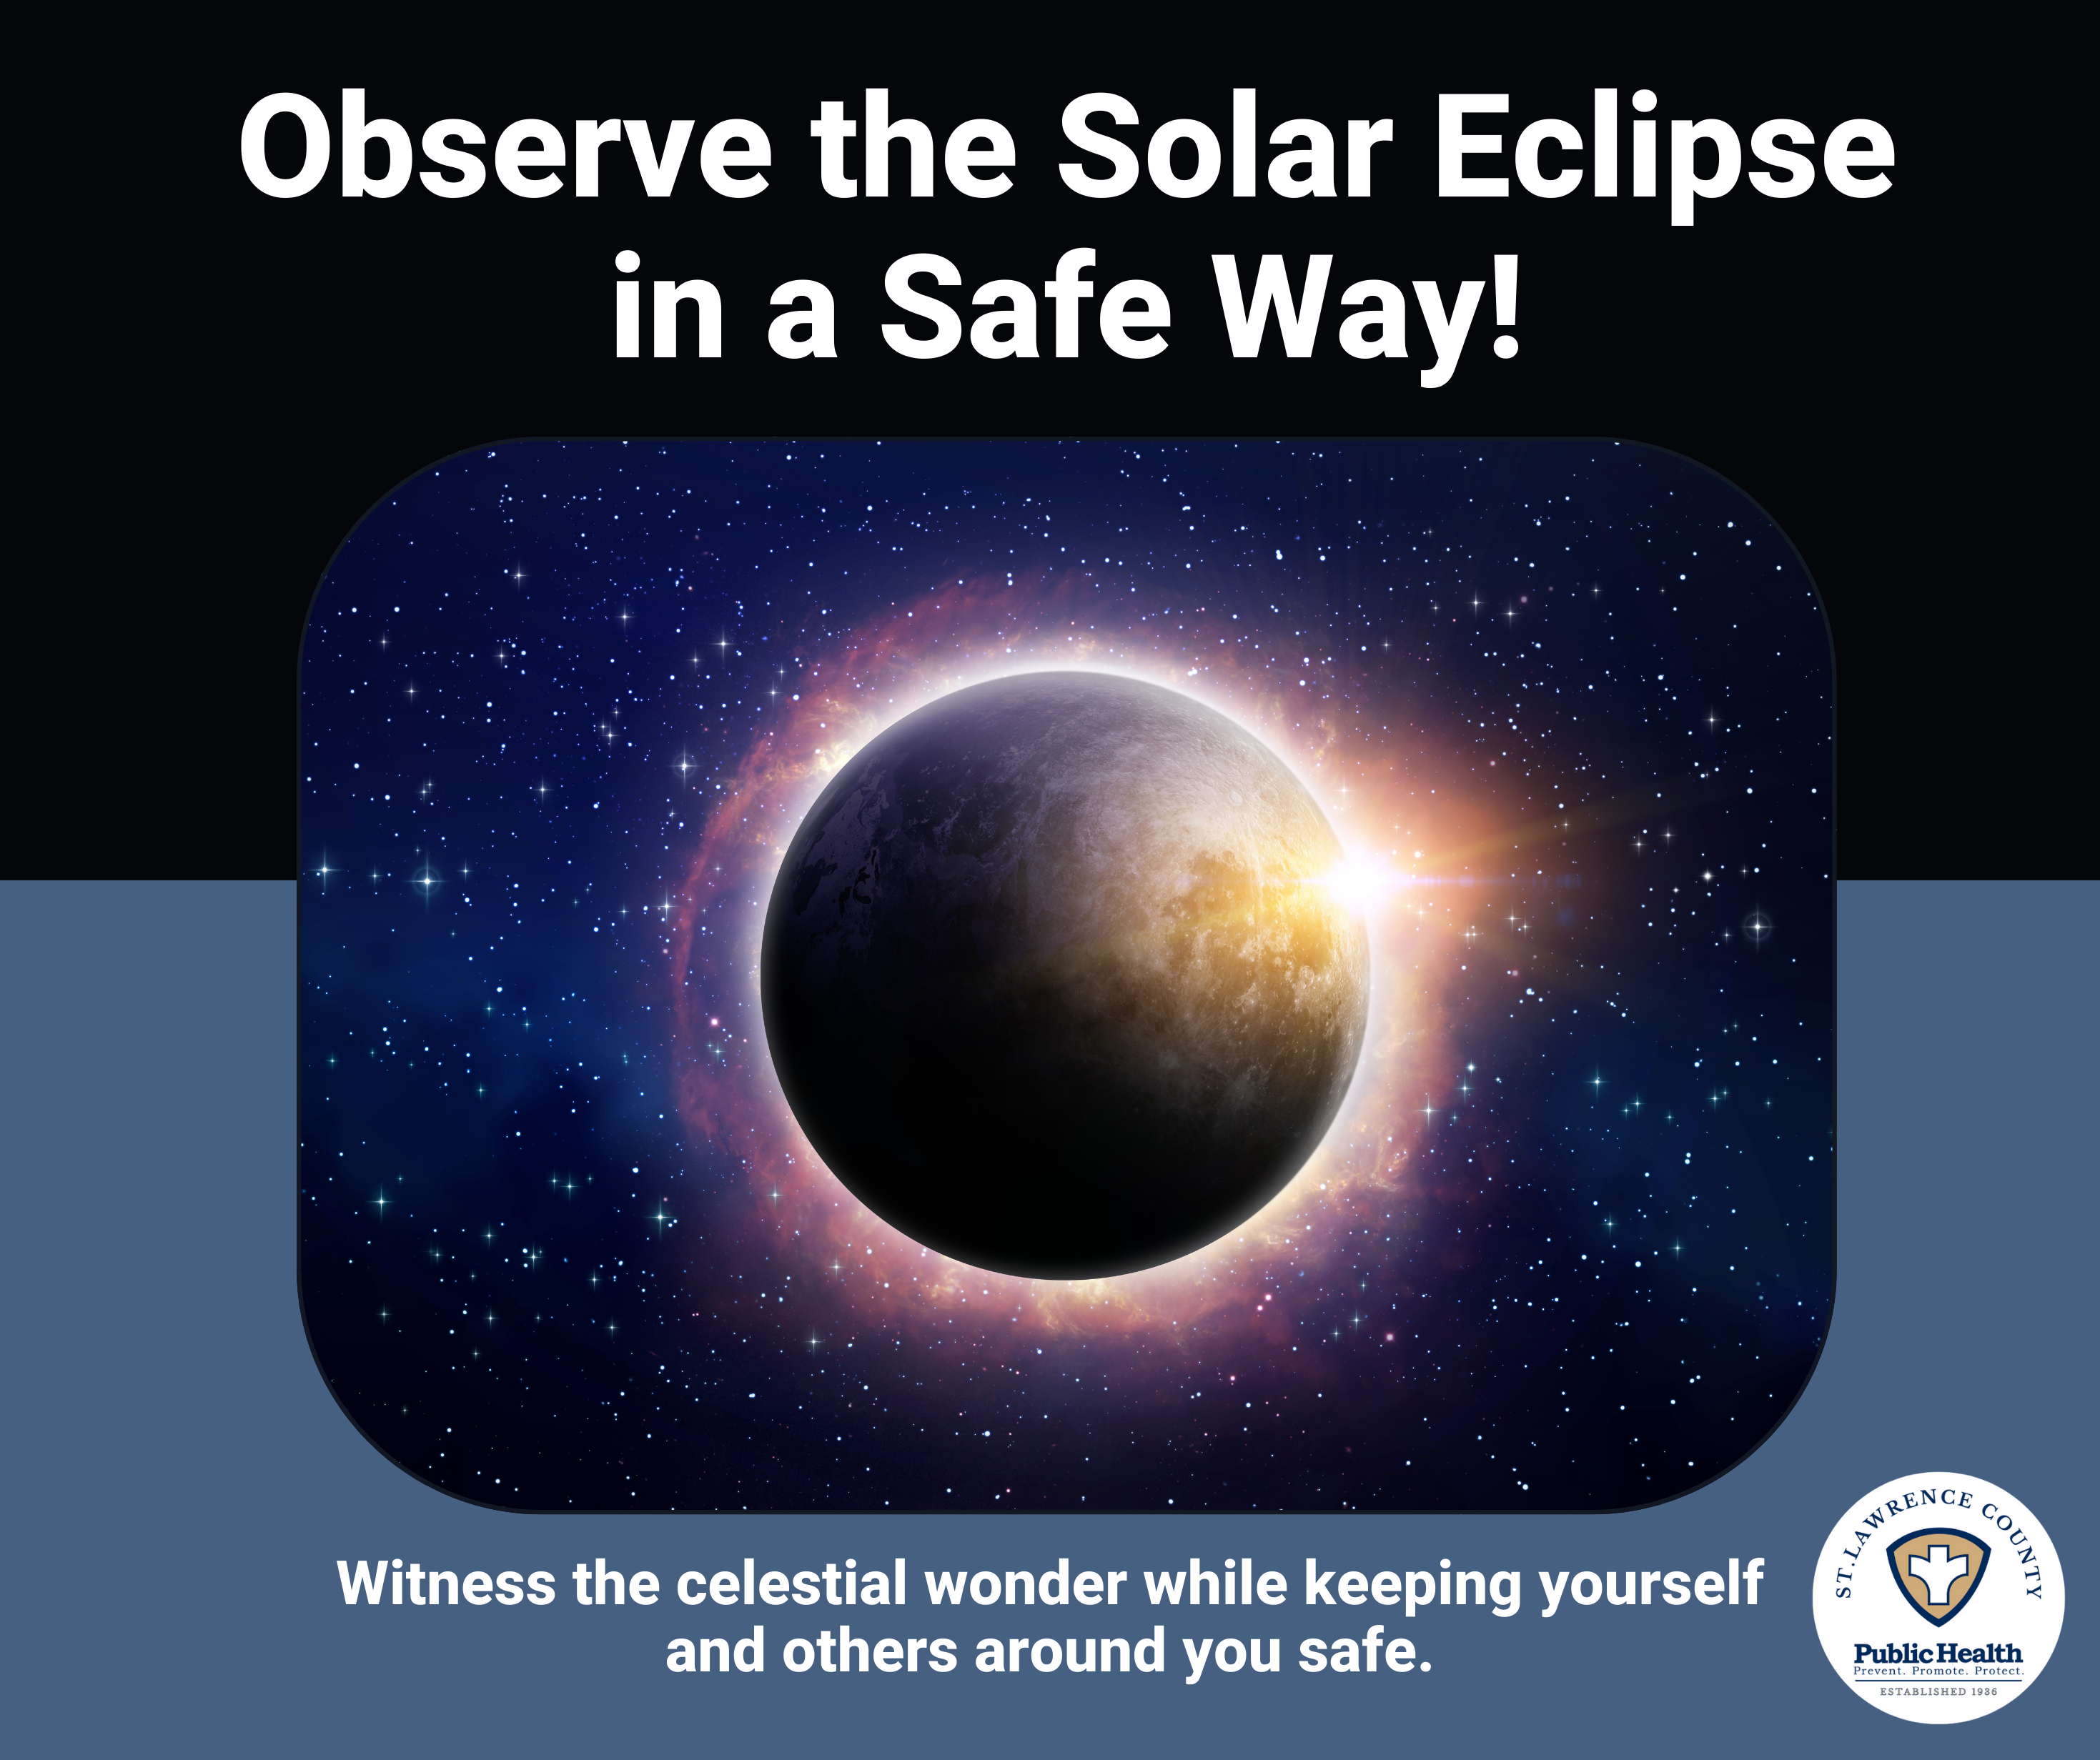 Observe the Solar Eclipse in a Safe Way! Witness the celestial wonder while keeping yourself and others around you safe.